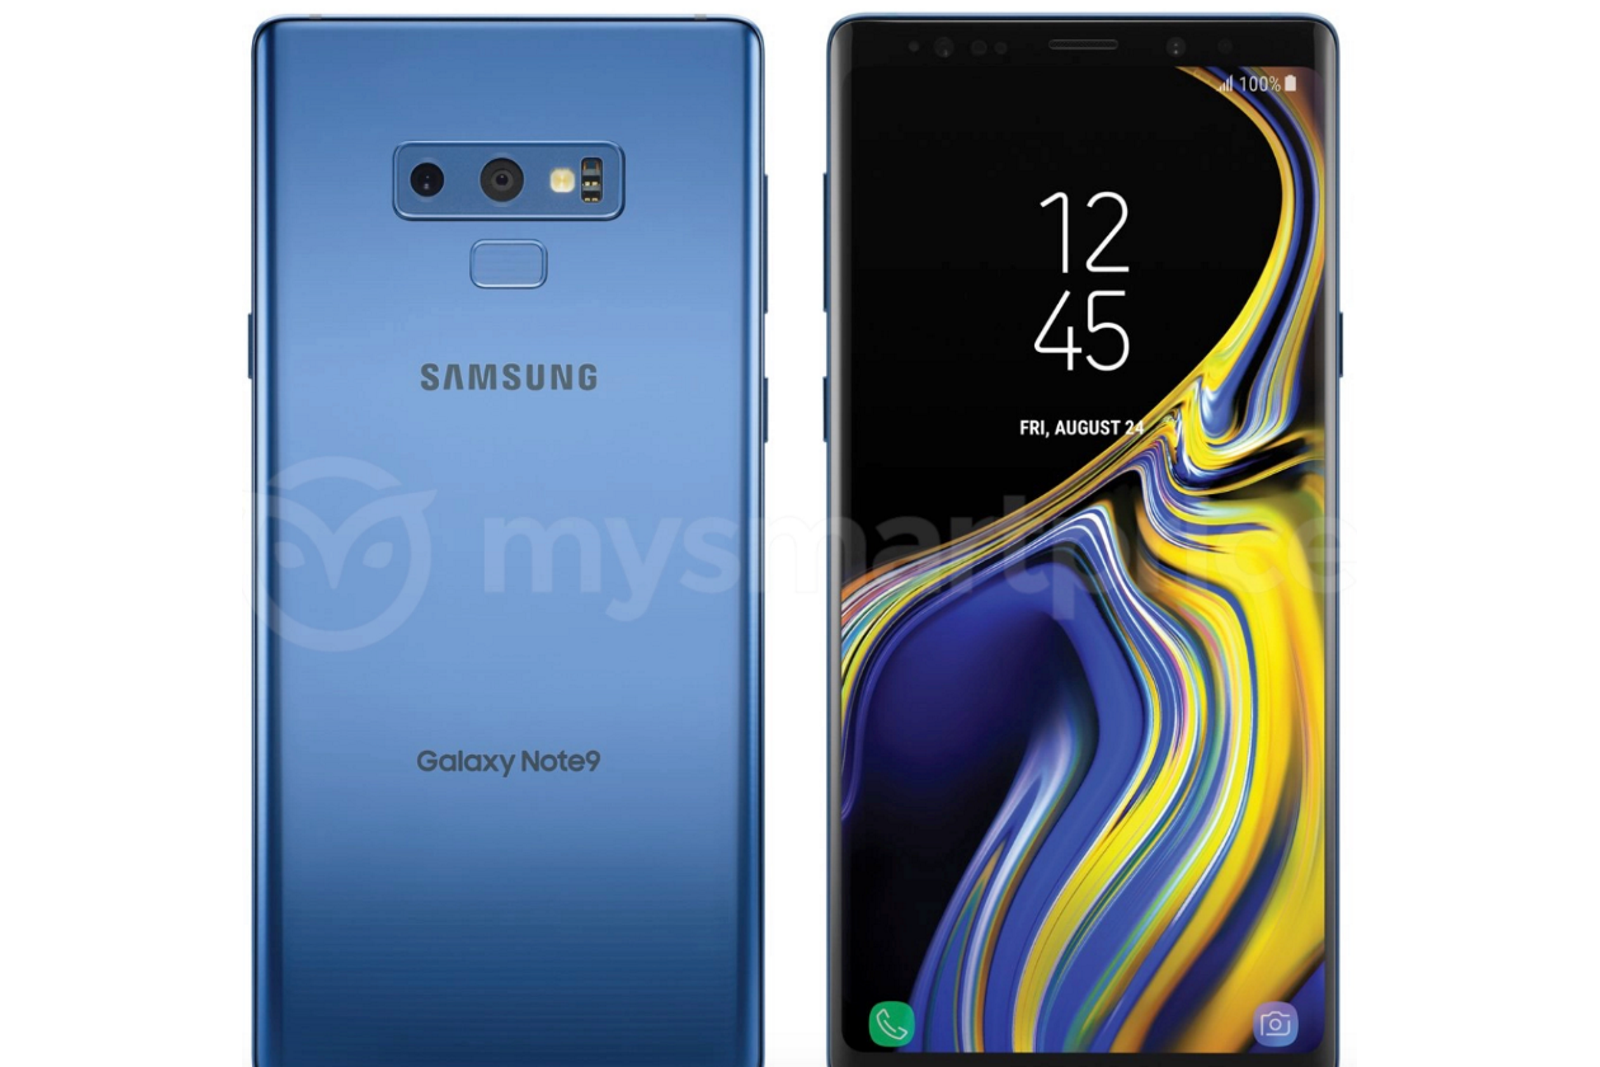 Someone already unboxed the Galaxy Note 9 image 2